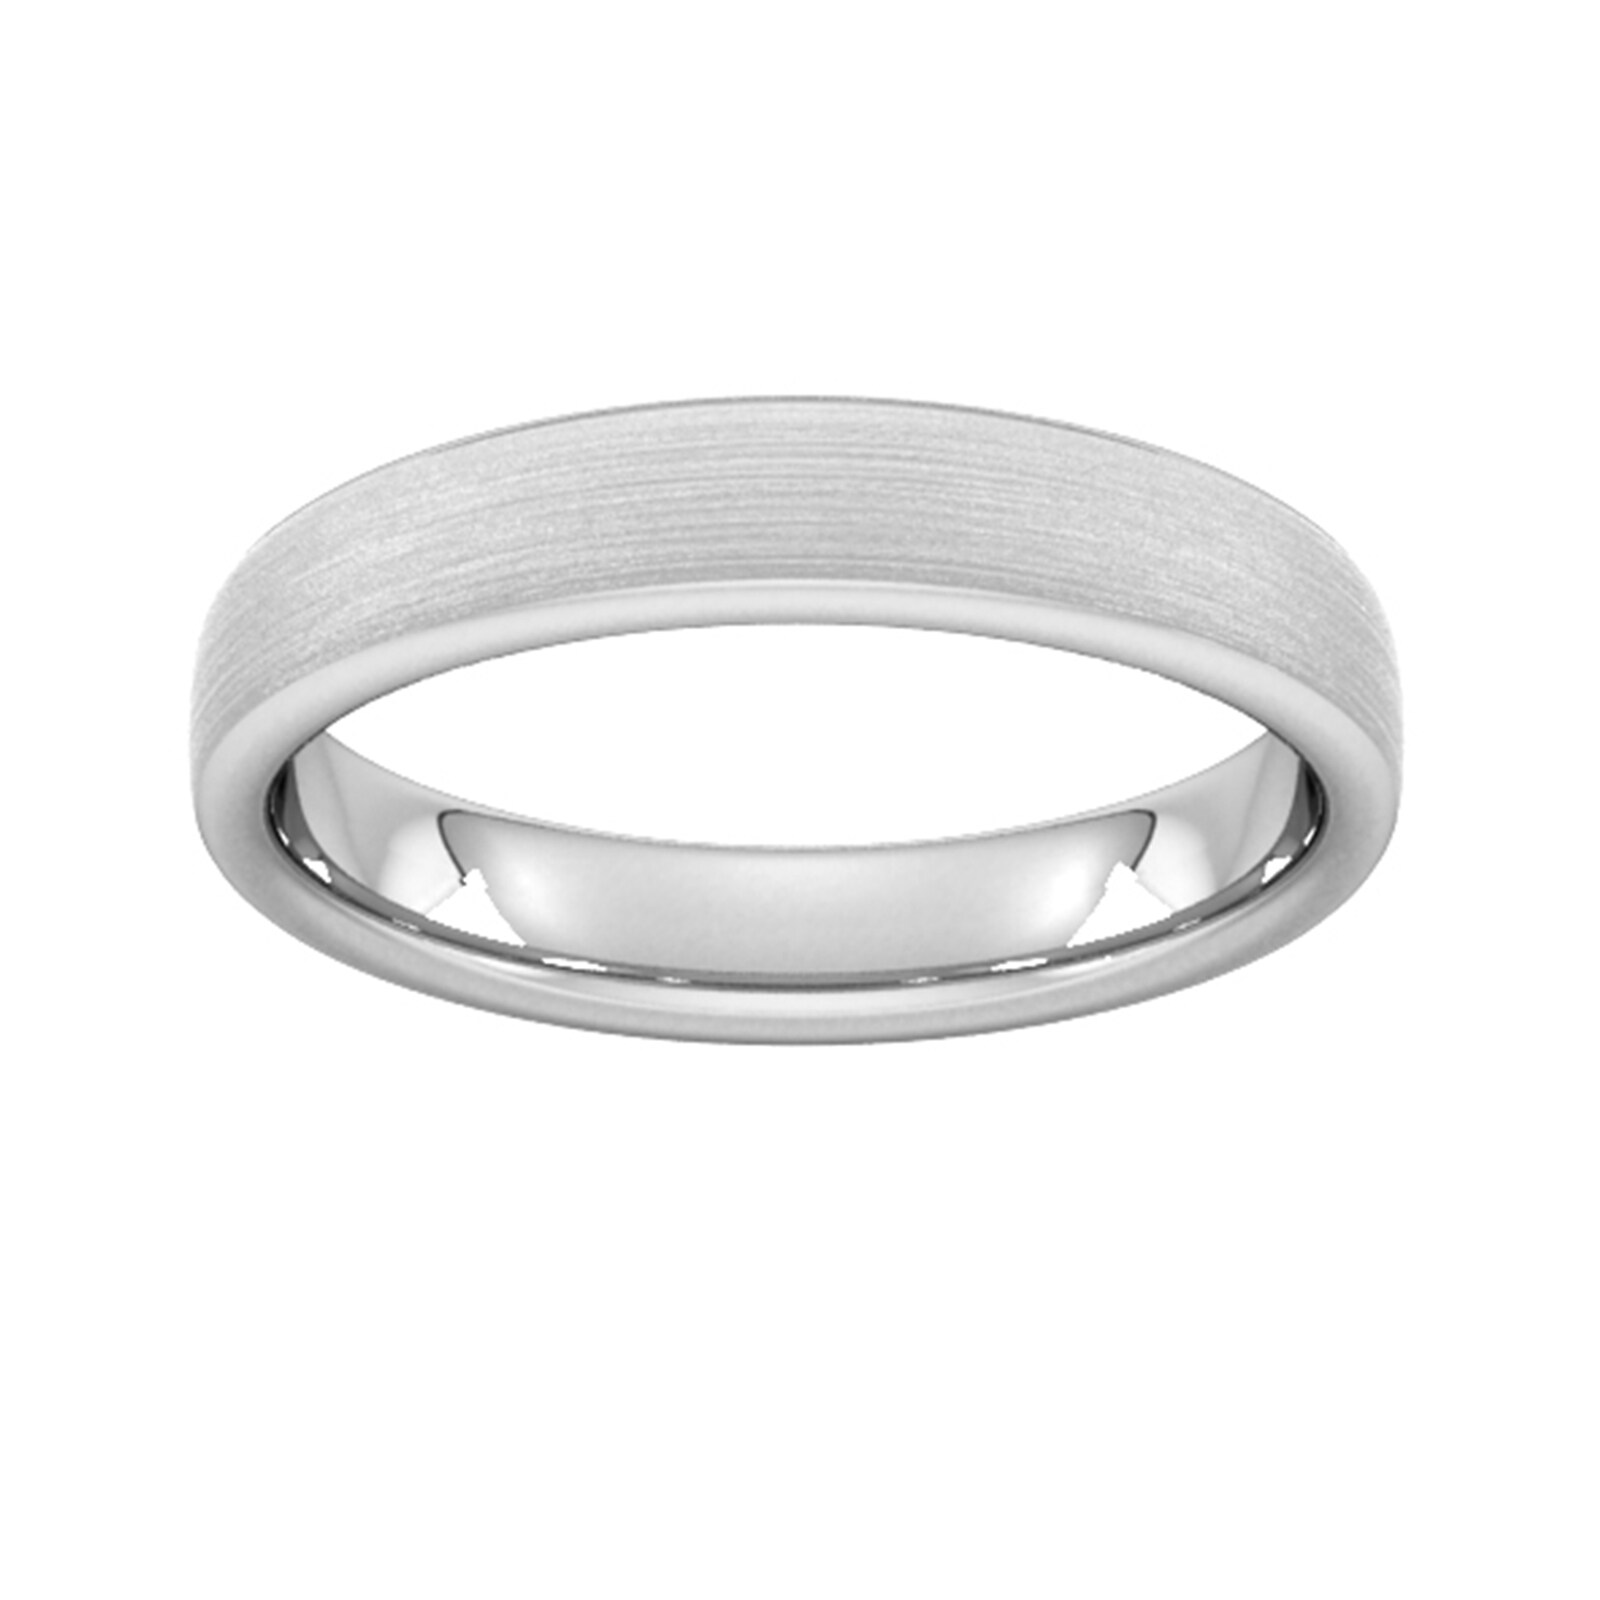 4mm D Shape Heavy Matt Finished Wedding Ring In 18 Carat White Gold - Ring Size P